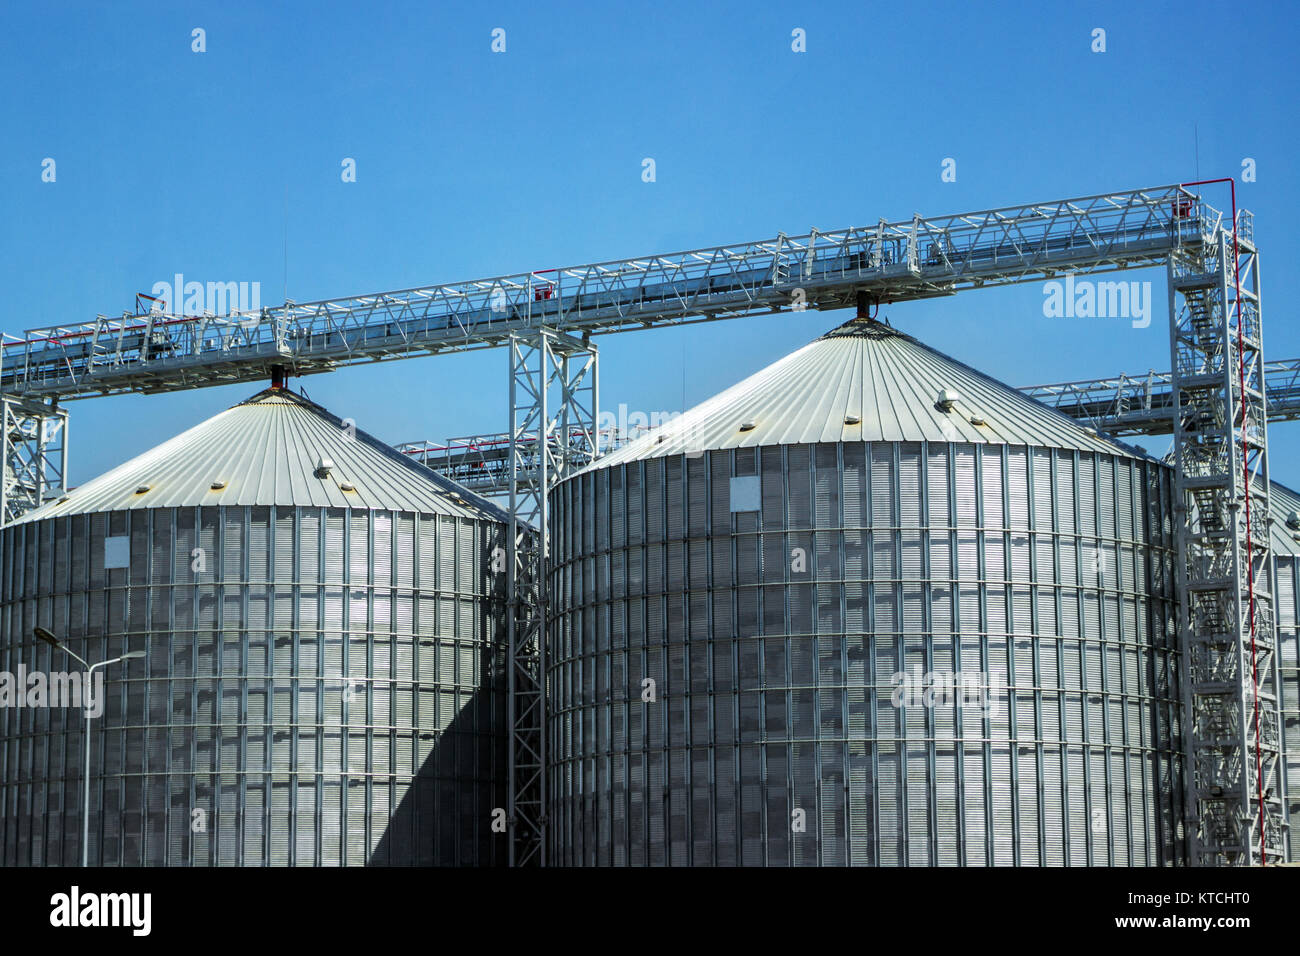 Industrial storage of raw materials in silos. Granary in the open sky ...